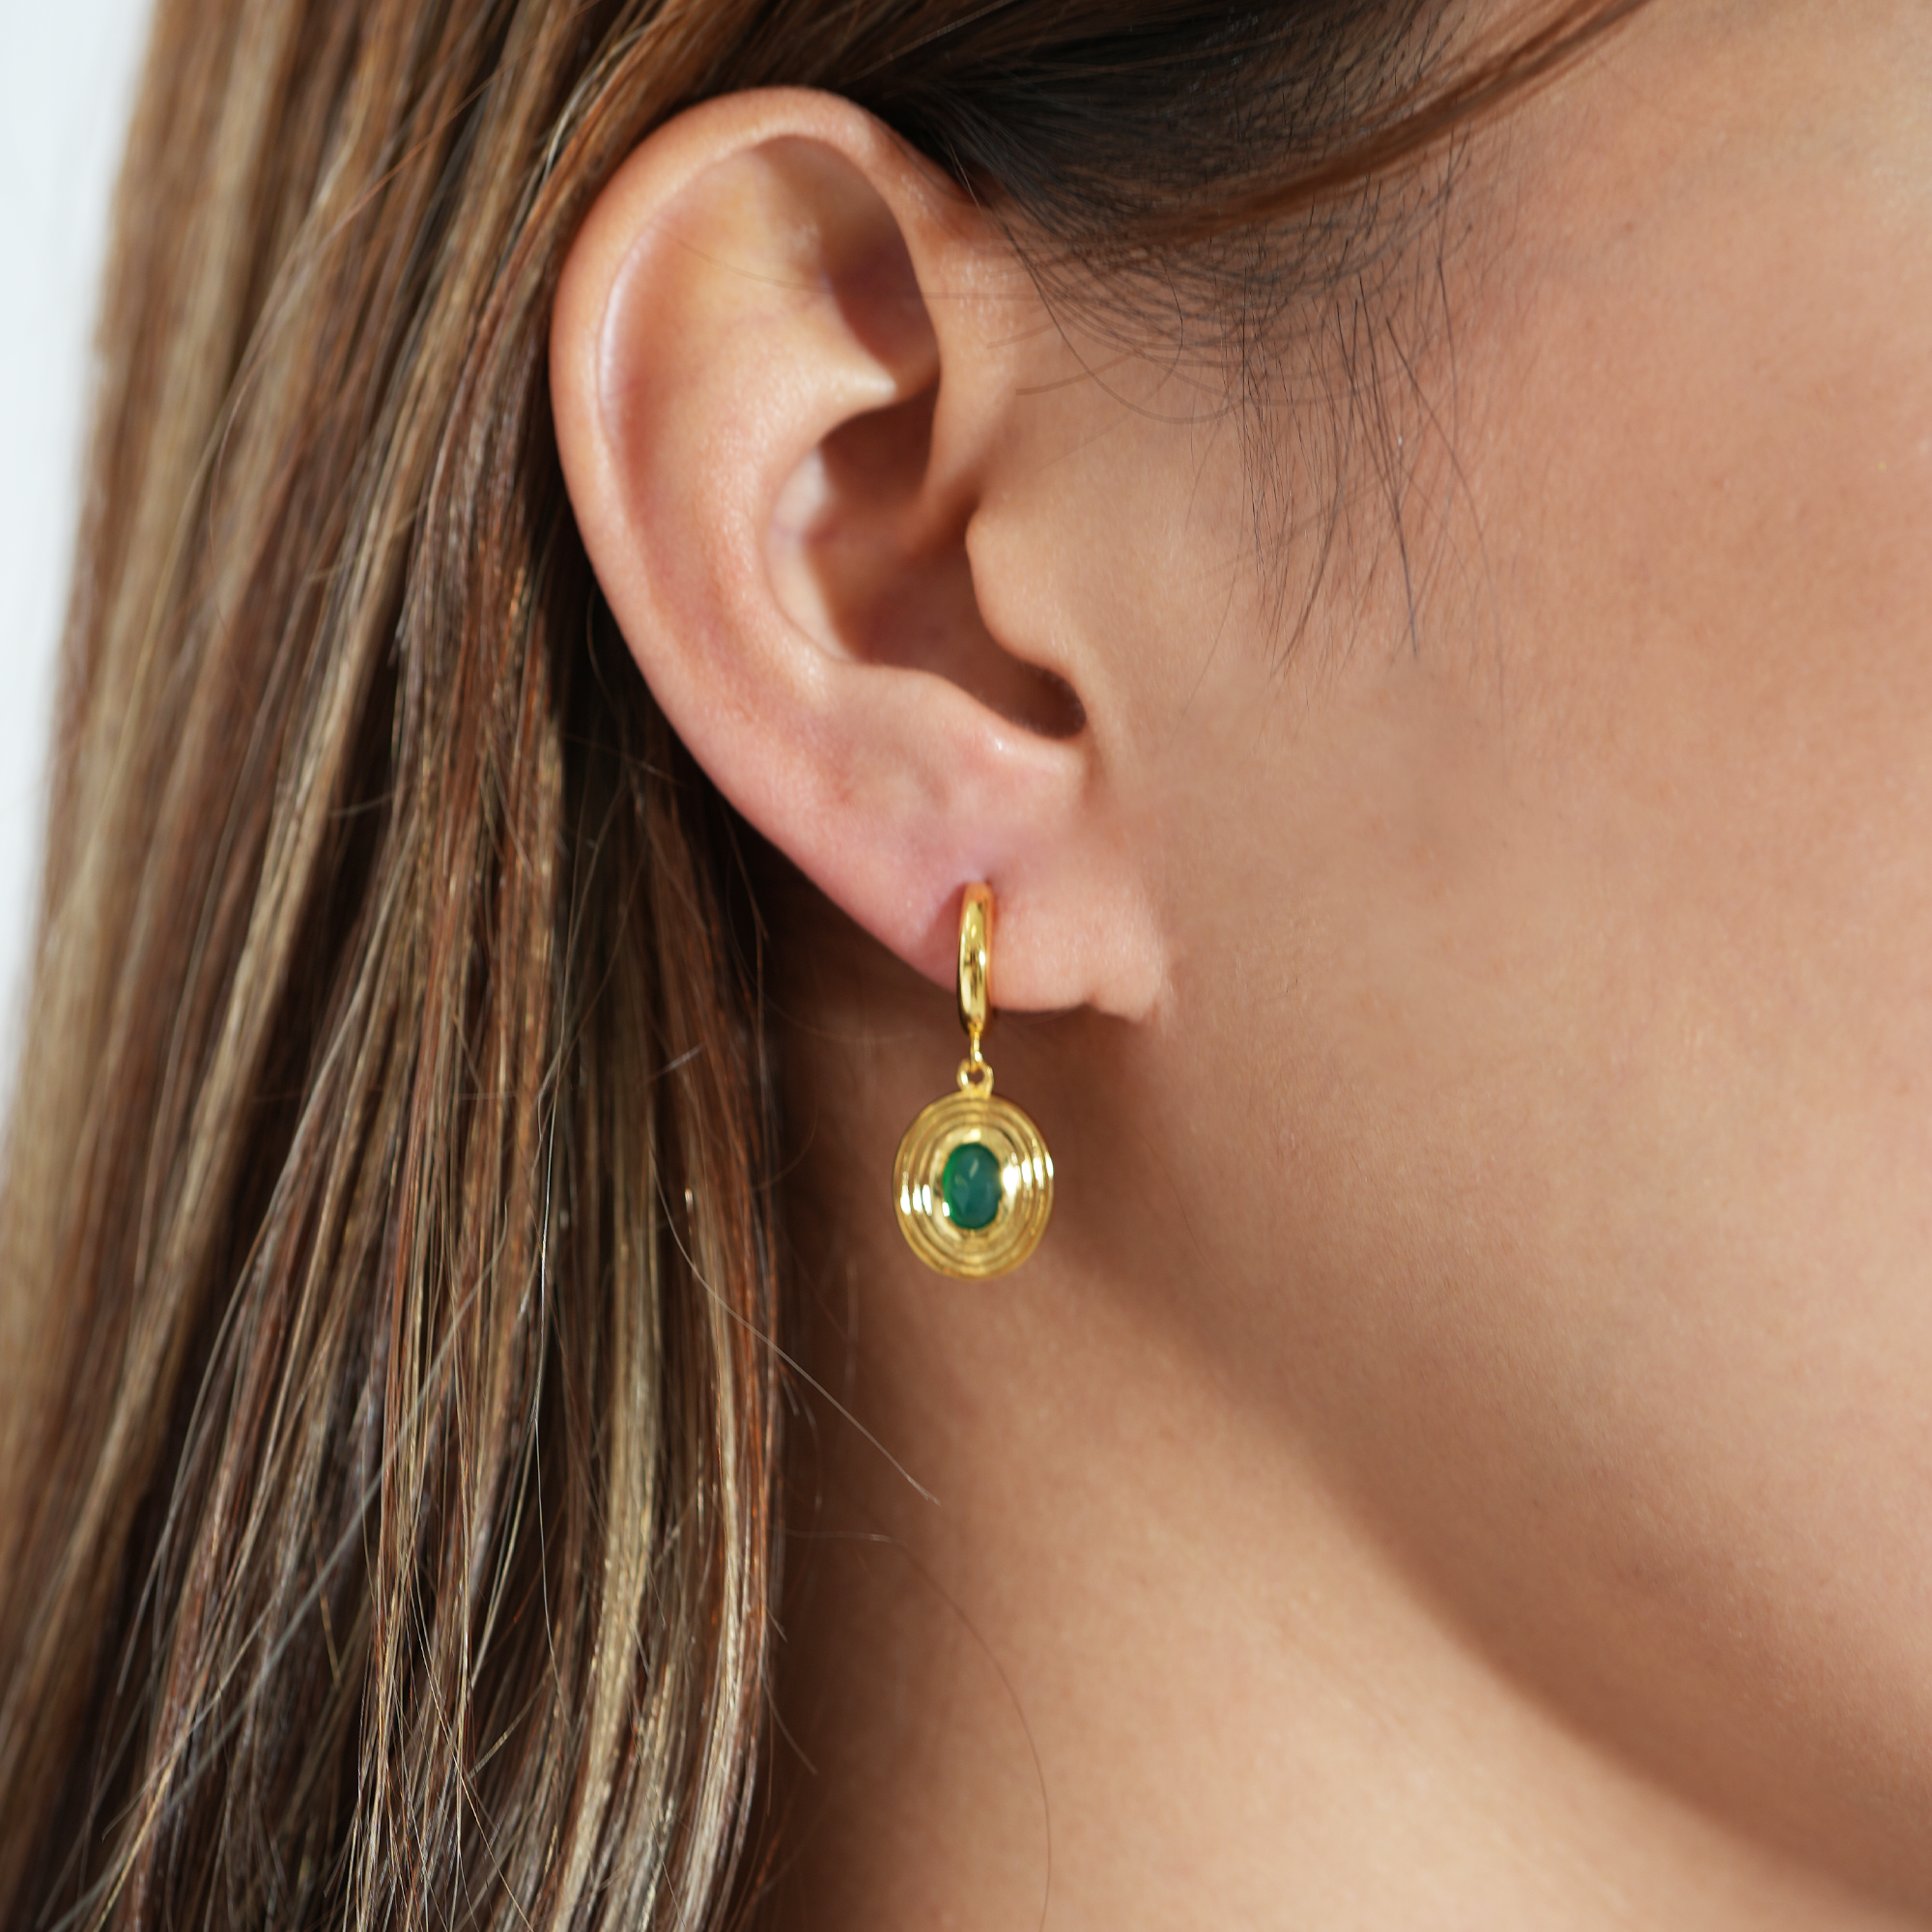 THE GREEN AGATE OVAL DROP EARRING